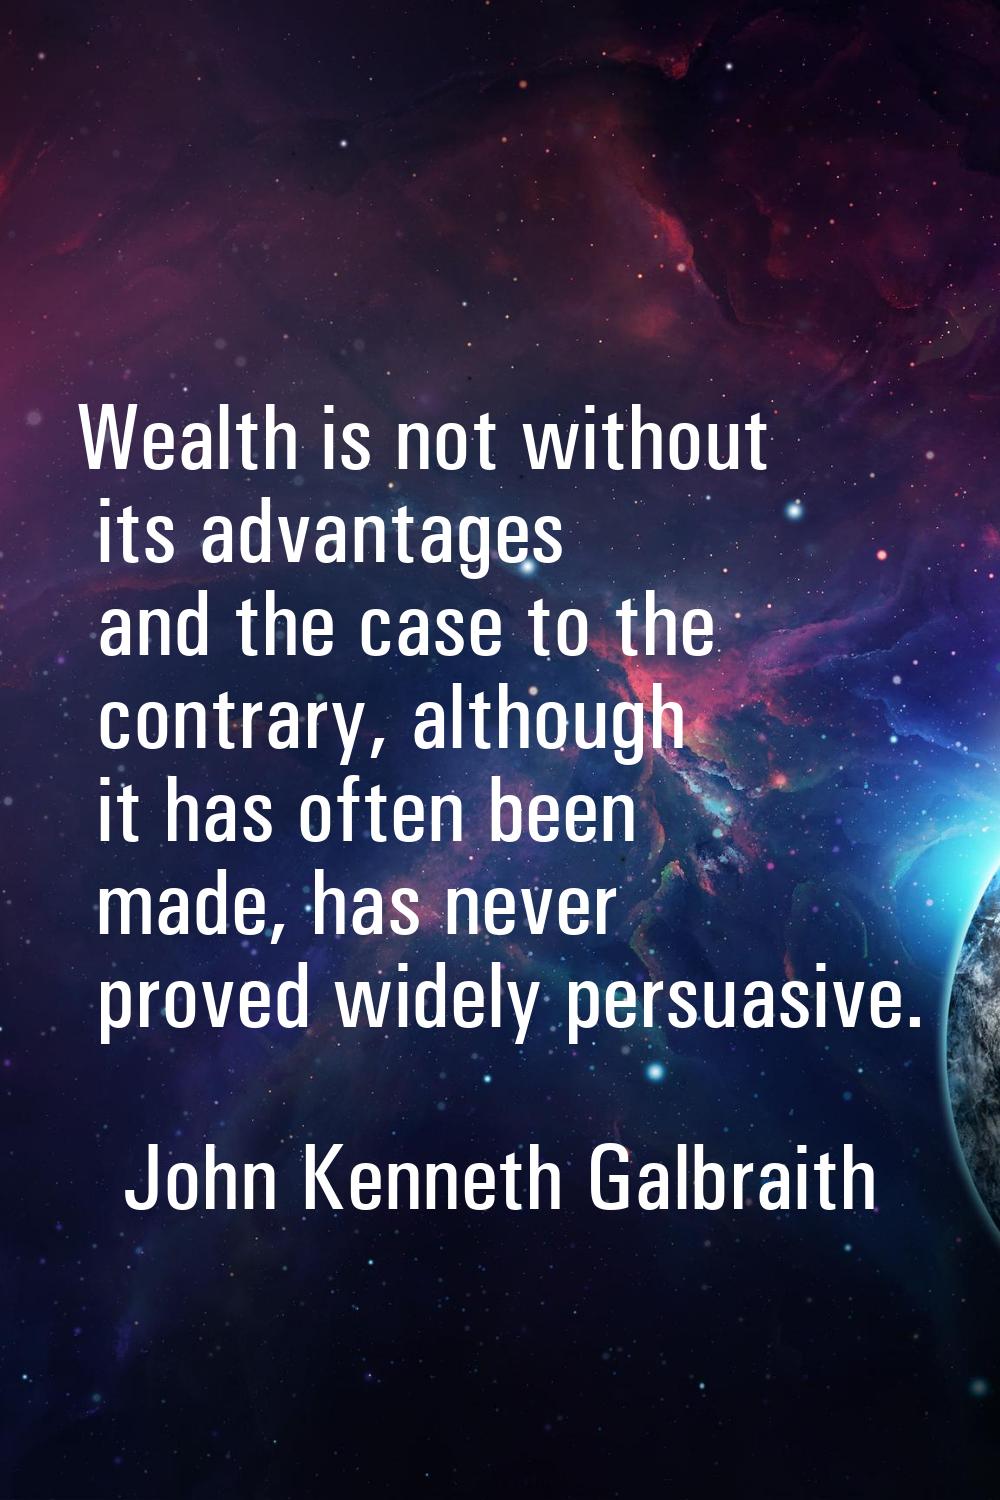 Wealth is not without its advantages and the case to the contrary, although it has often been made,